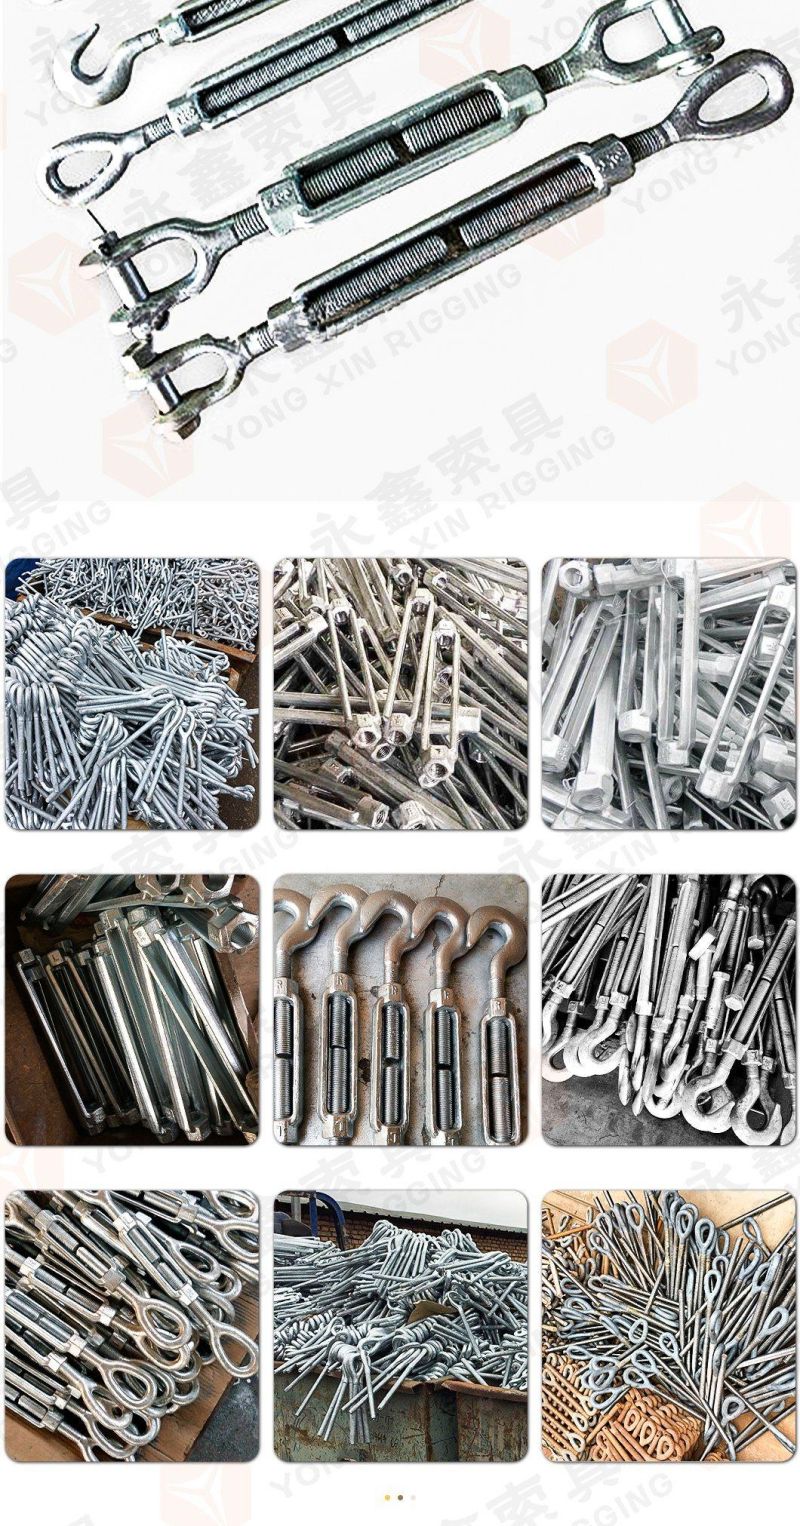 Galvanized JIS Frame Type Turnbuckle with Eye and Hook